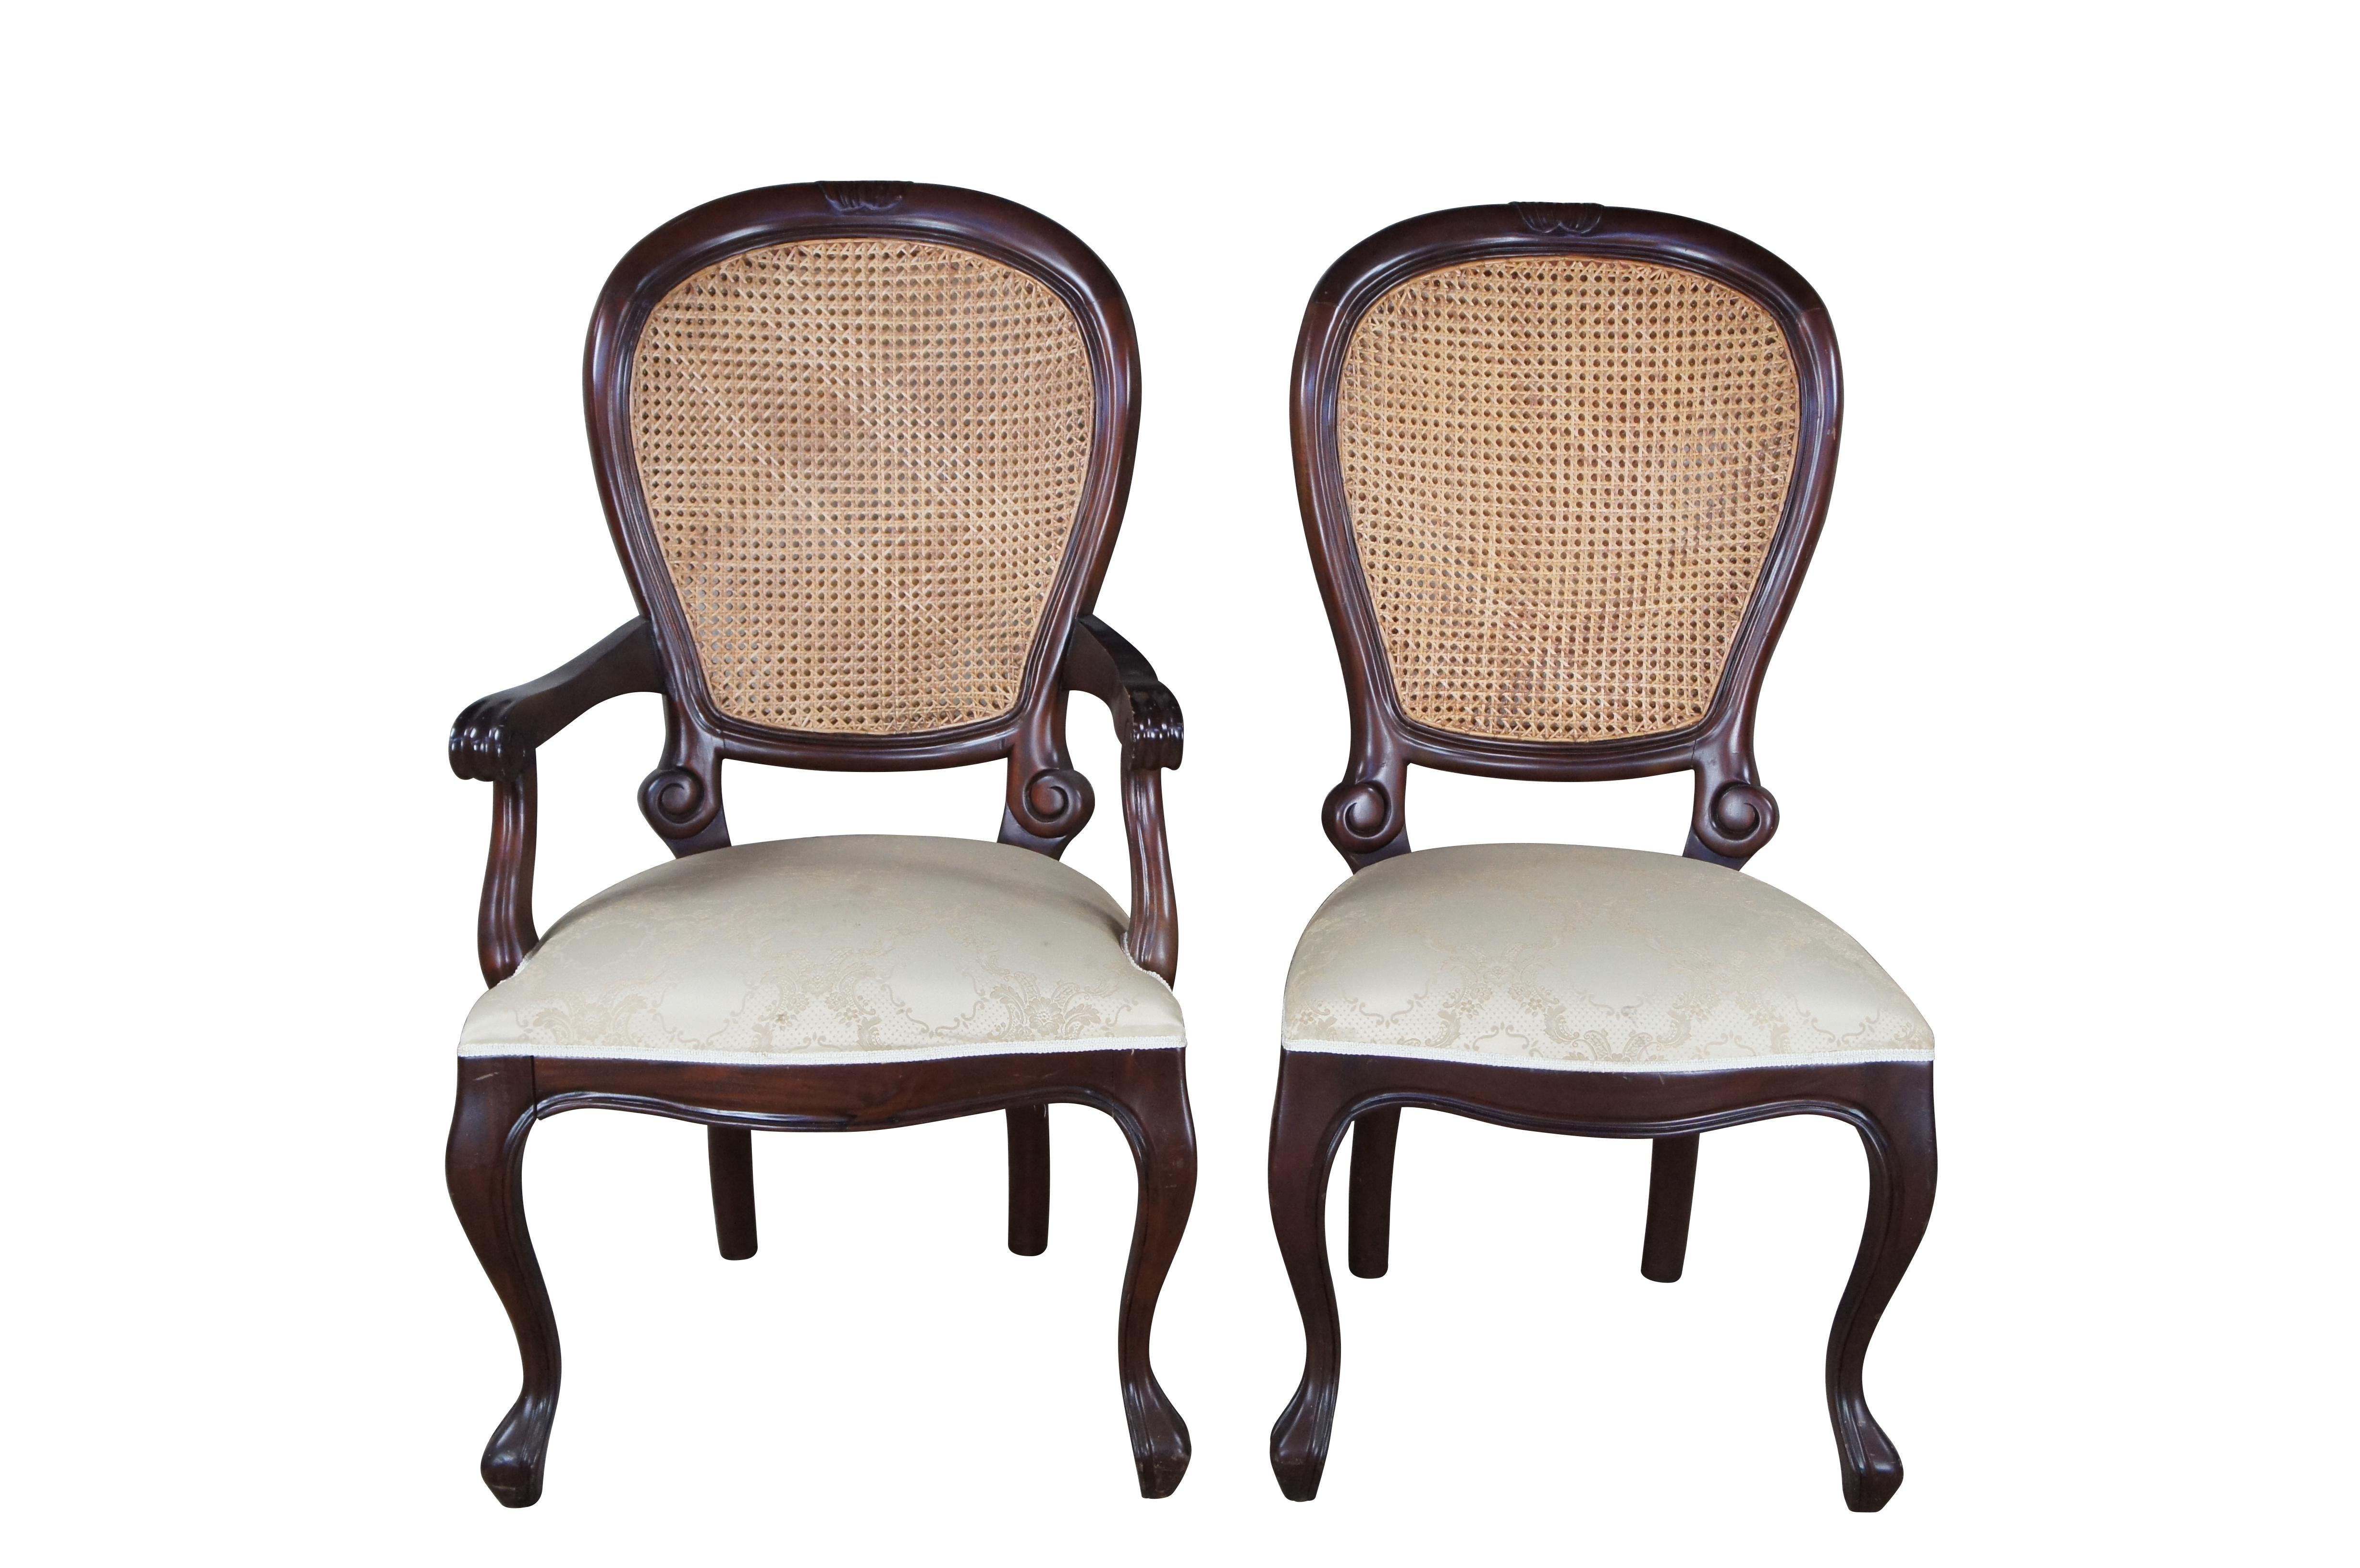 Set of 3 large late 20th century Victorian style dining chair. Made for Due Process Trading Company. Feature a solid mahogany frame with double cane balloon or spoon back leading to scrolled accents and silk brocade seat cushions. The chairs are